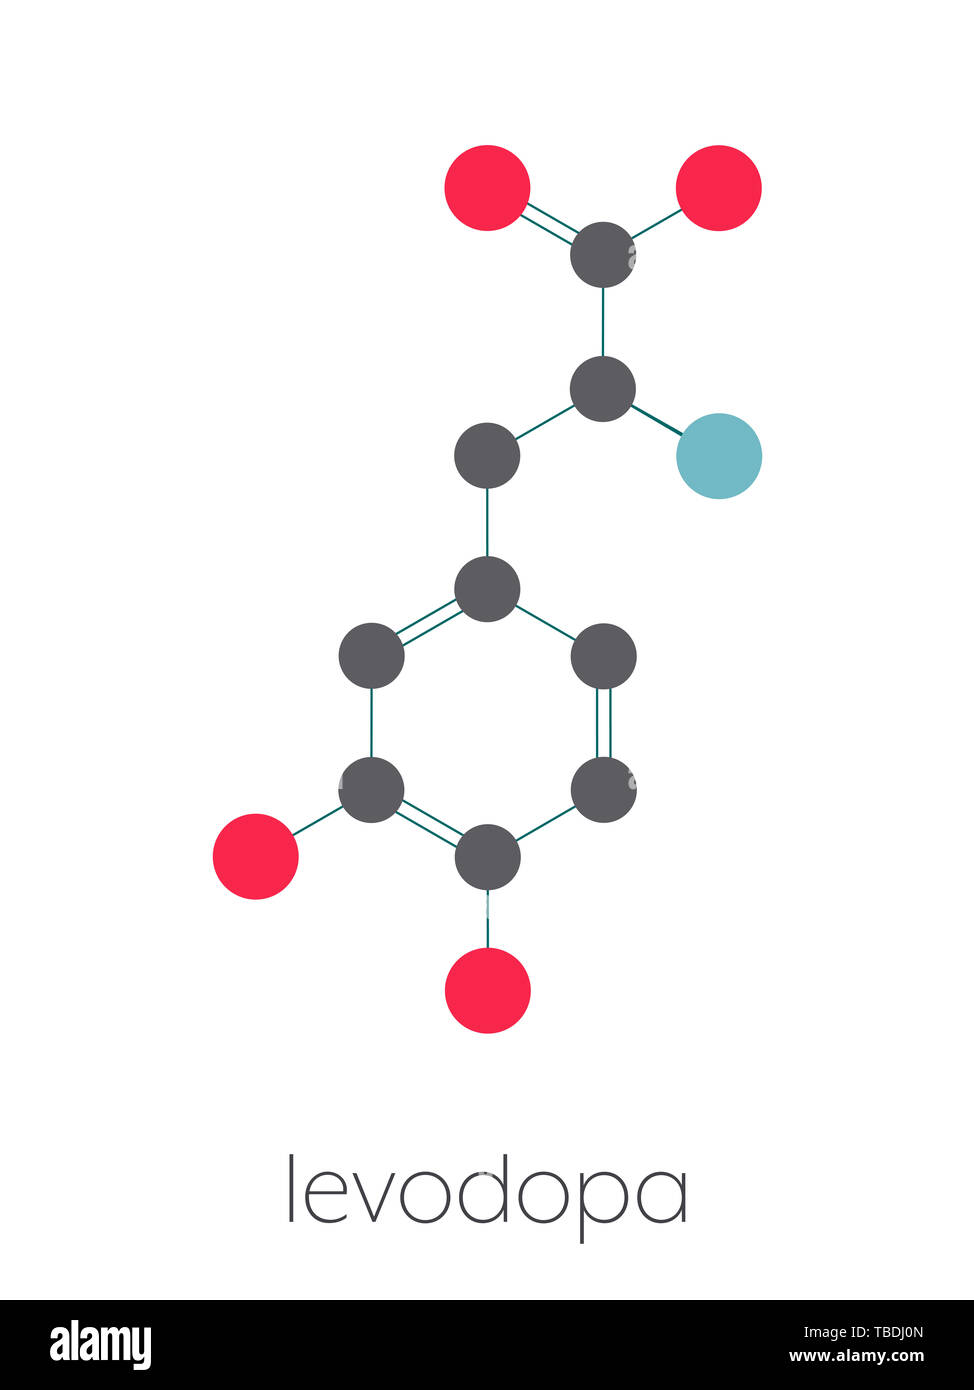 L-DOPA (levodopa) Parkinson's disease drug molecule. Stylized skeletal formula (chemical structure). Atoms are shown as color-coded circles connected by thin bonds, on a white background: hydrogen (hidden), carbon (grey), oxygen (red), nitrogen (blue). Stock Photo